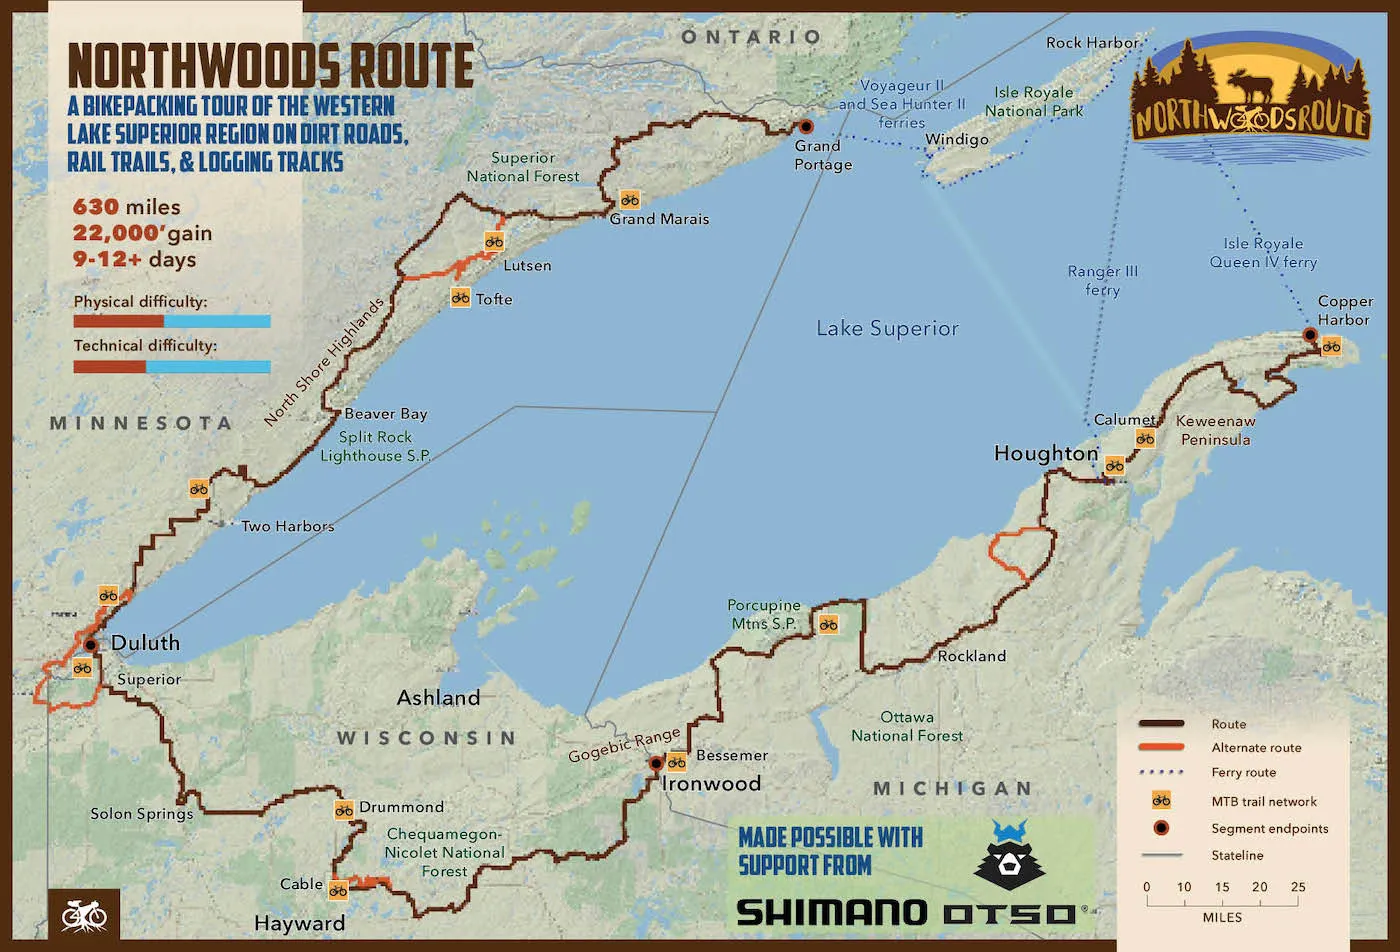 Bikepacking Roots Releases the 600-Mile Northwoods Route, of which Otso Cycles is a presenting sponsor.